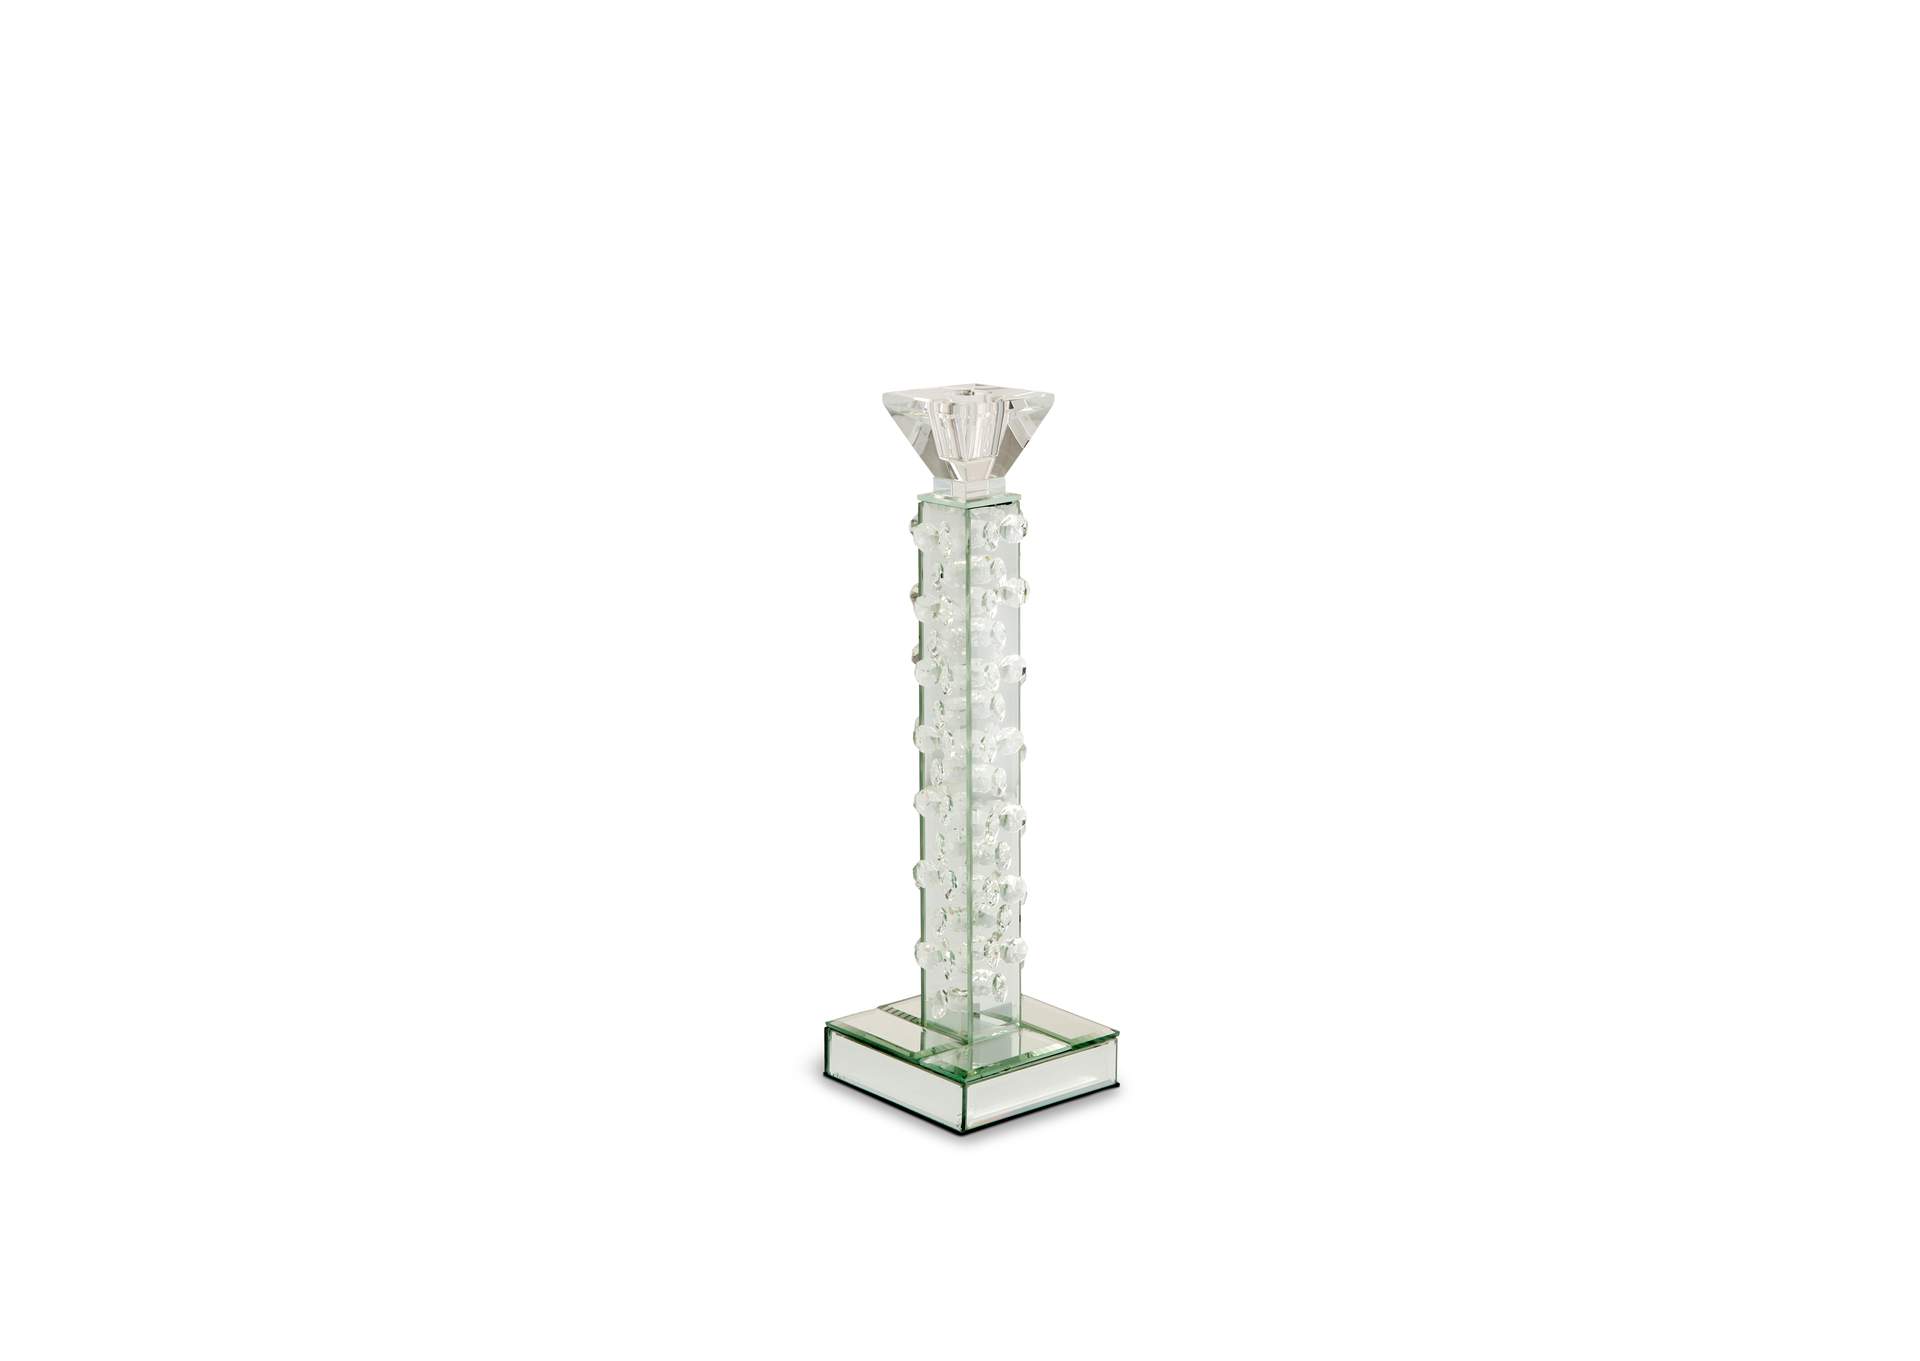 Montreal Slender Mirrored Crystal Candle Hldr.Small,Pack/6,Michael Amini (AICO)